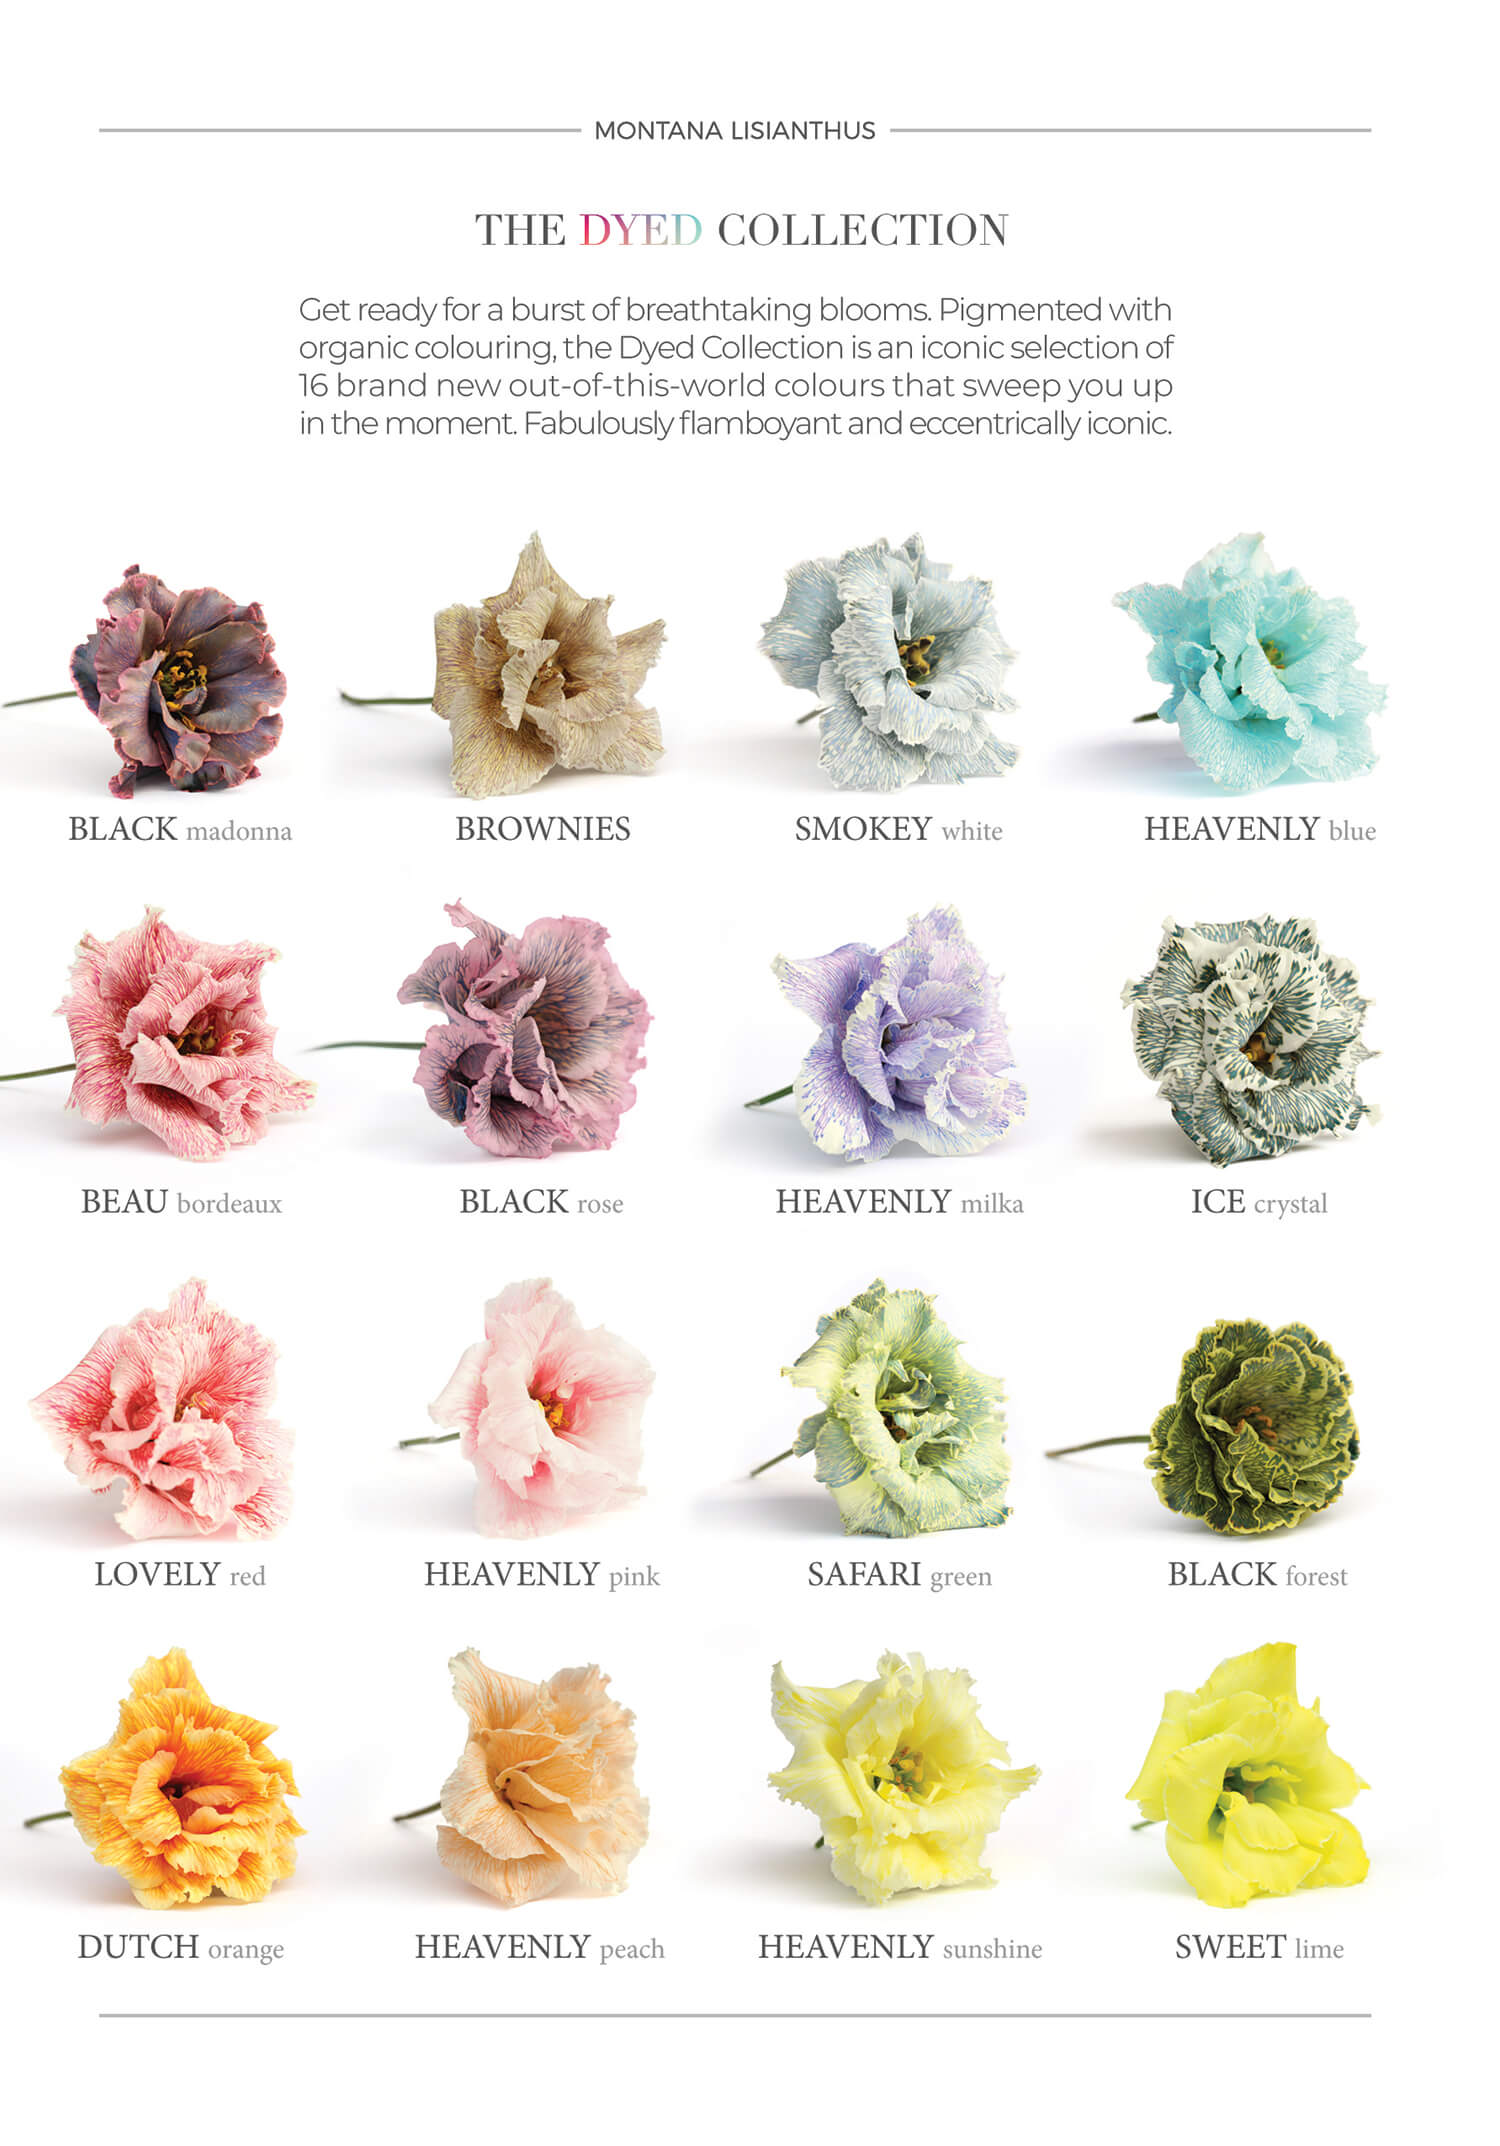 Montana Lisianthus dyed collection digital flyer